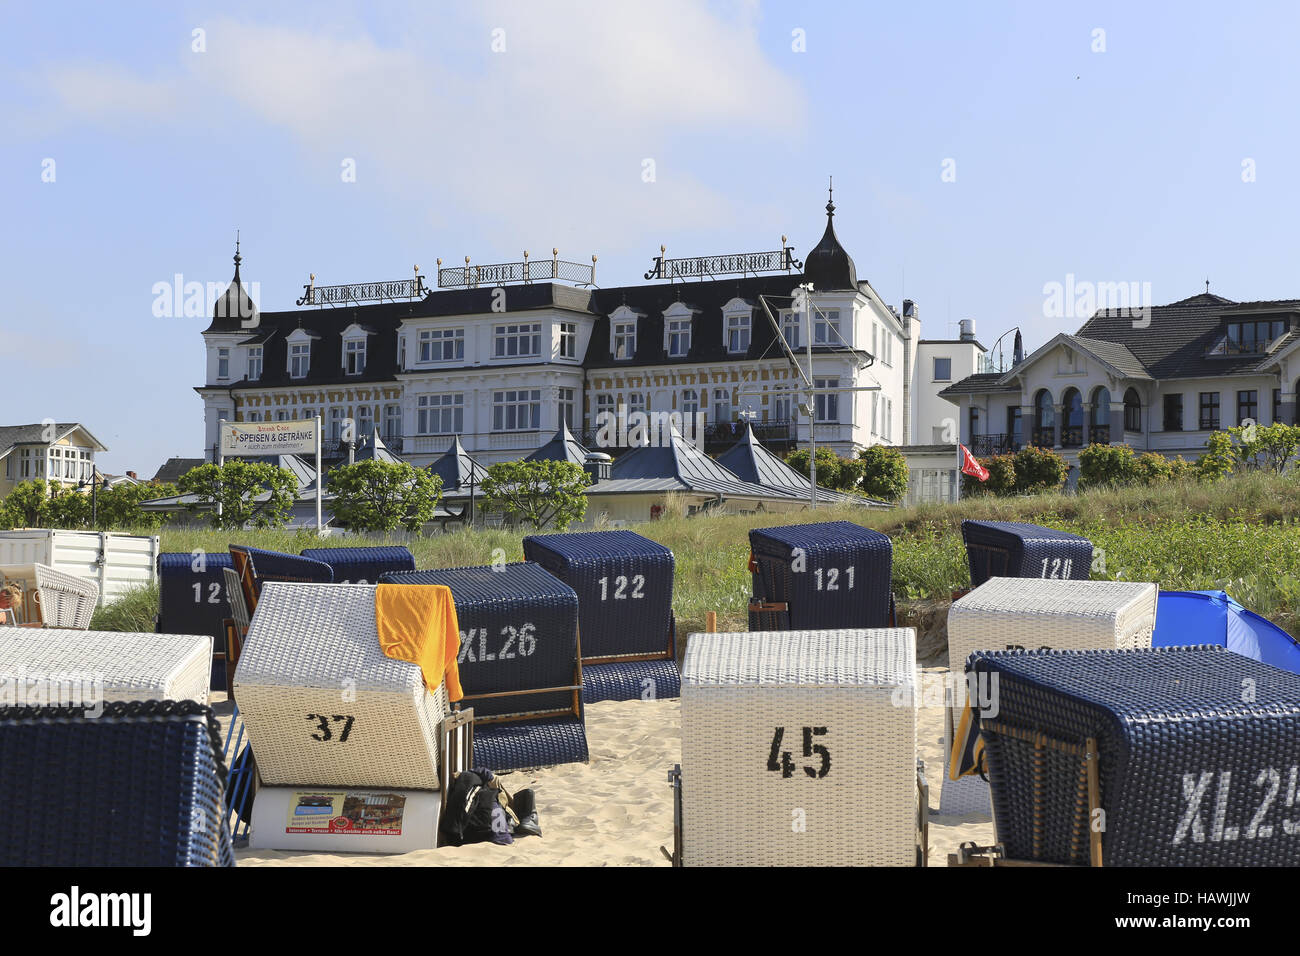 Ahlbeck, Usedom Is. Stock Photo